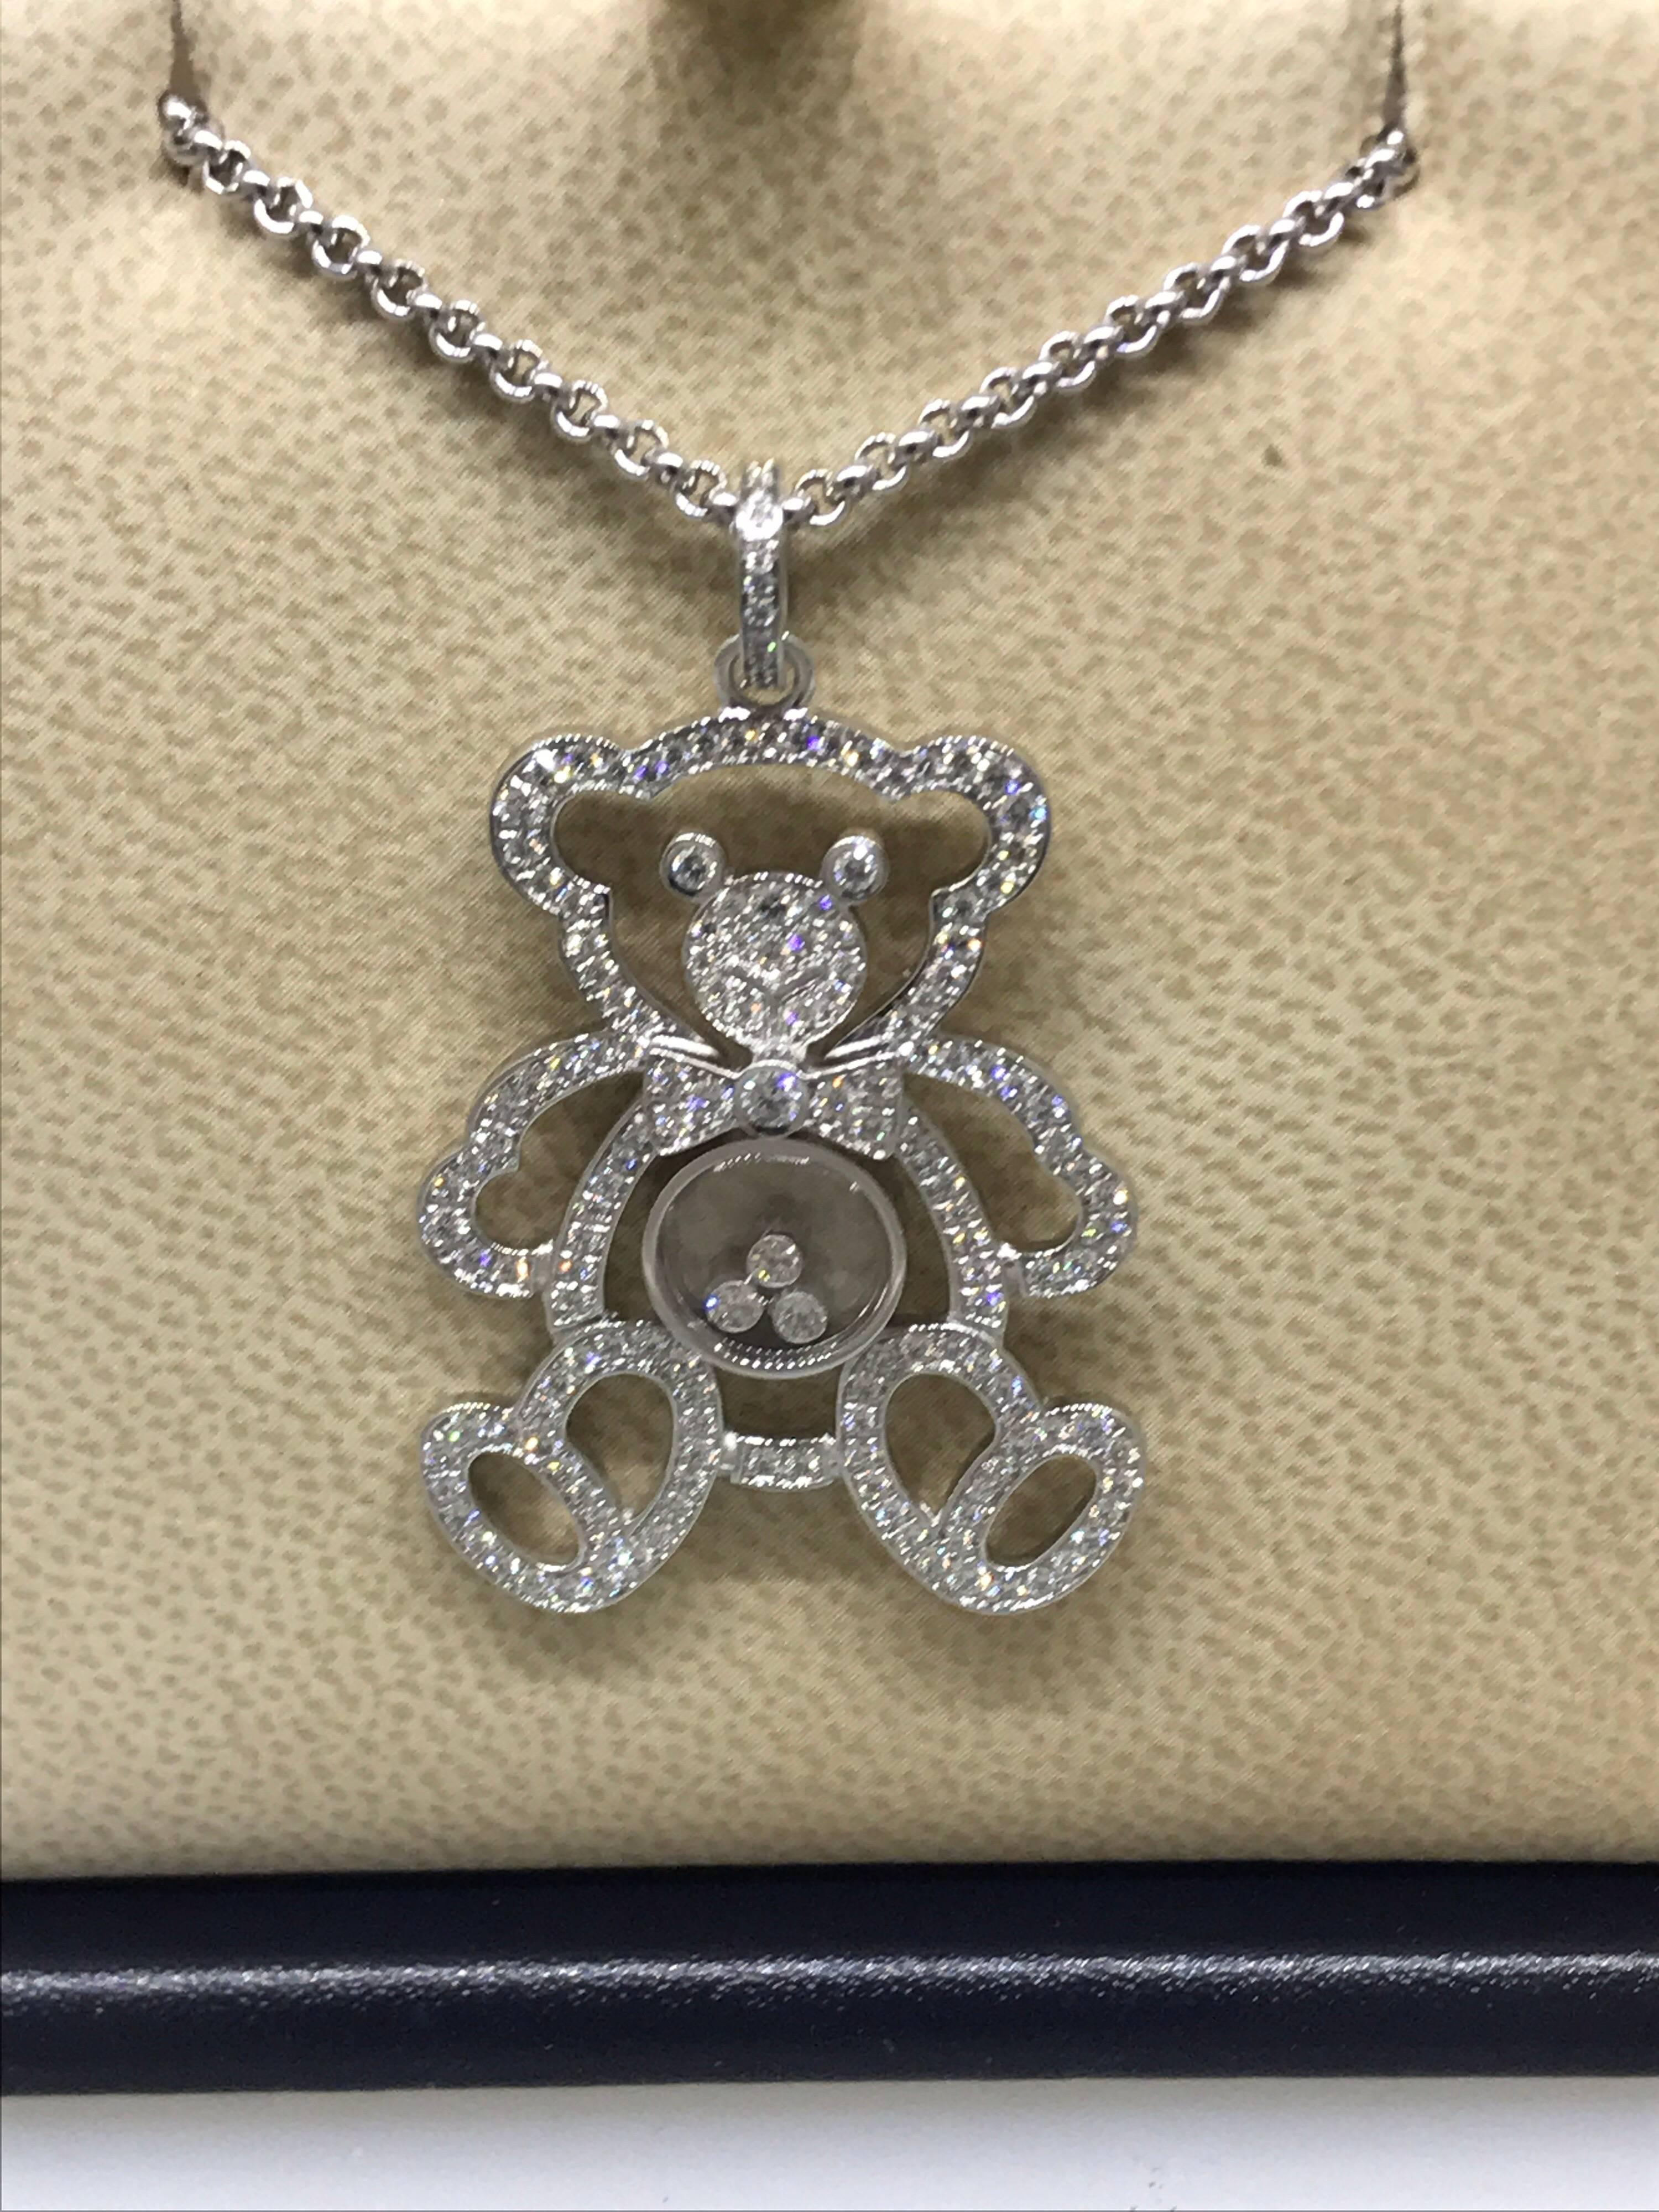 Chopard Happy Diamonds Teddy Bear pendant / necklace

Model Number: 79/7418-1003

100% Authentic

Brand New

Comes with original Chopard box, certificate of authenticity and warranty and jewels manual

18 Karat White Gold (24.25gr)

169 Diamonds on